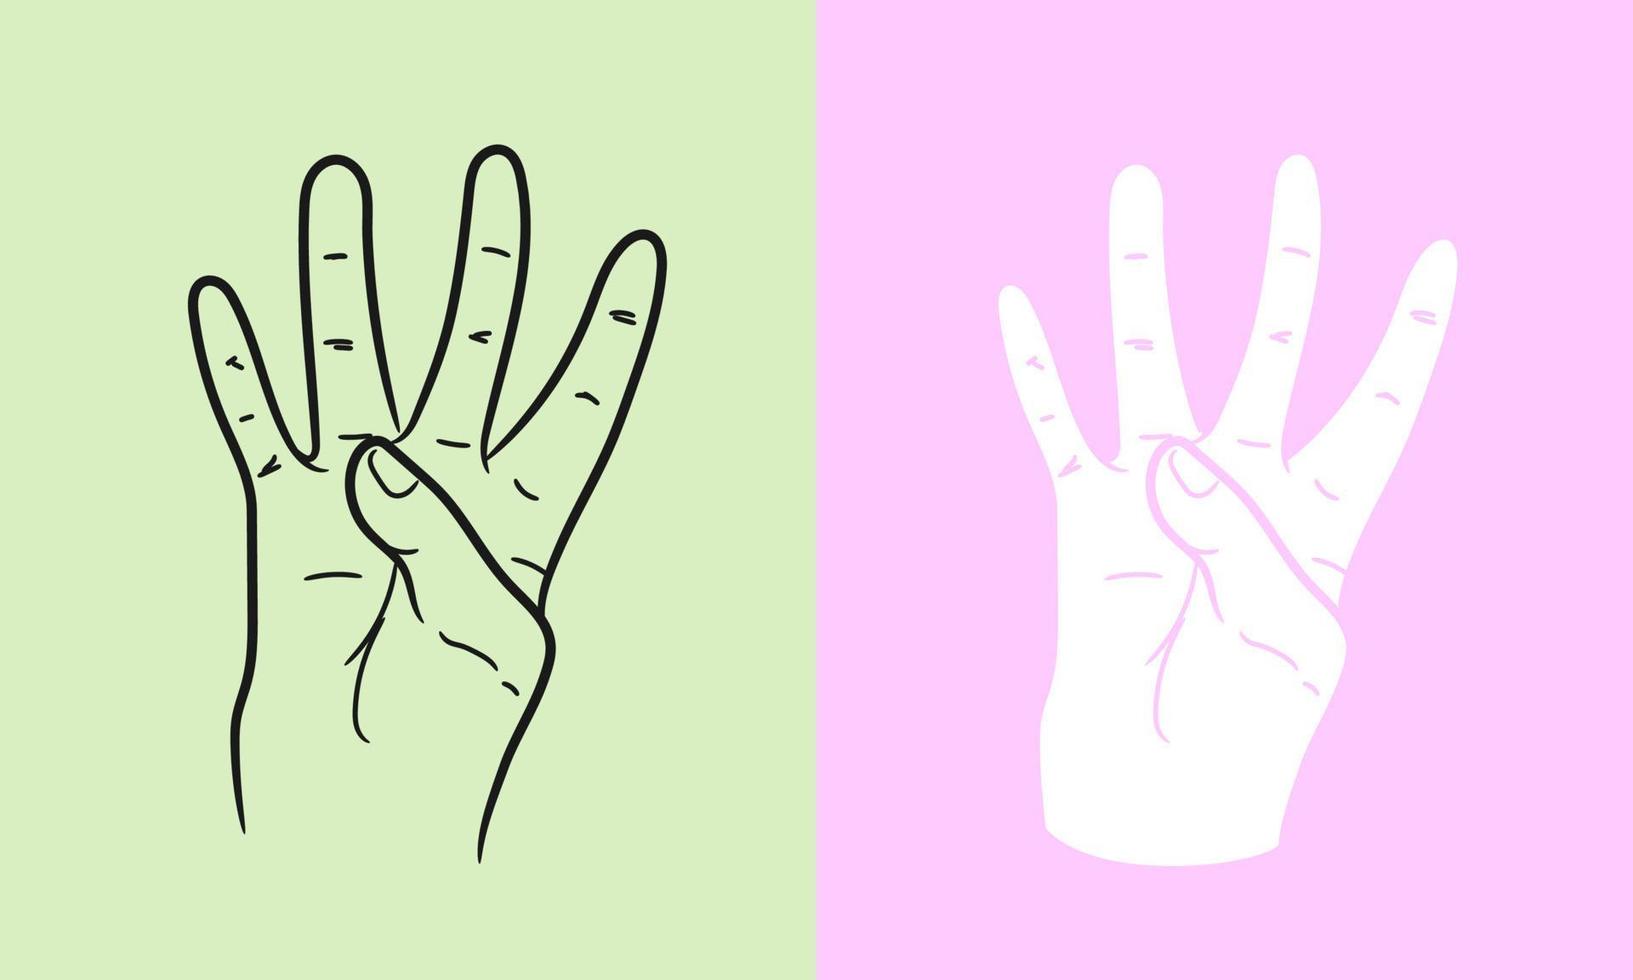 Four fingers sign of Hand gestures vector illustration template. Realistic gesture line art of human hand. Isolated on background. Vector eps 10.